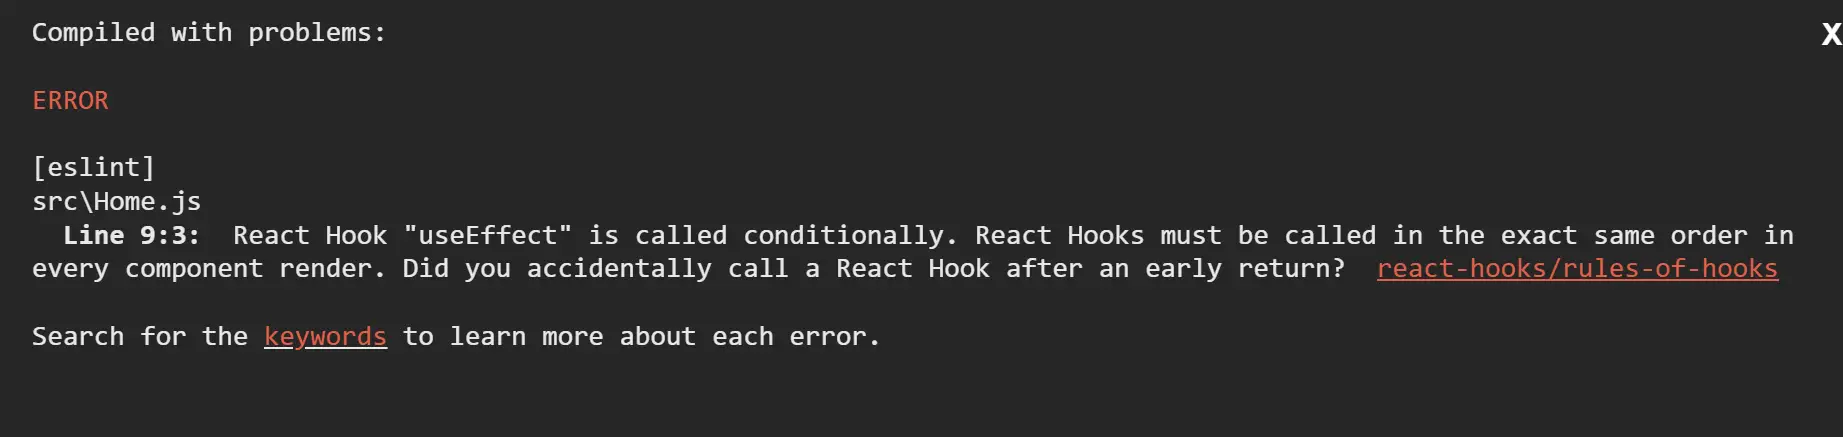 React Hook "useEffect" is called conditionally. React Hooks must be called in the exact same order in every component render. Did you accidentally call a React Hook after an early return?